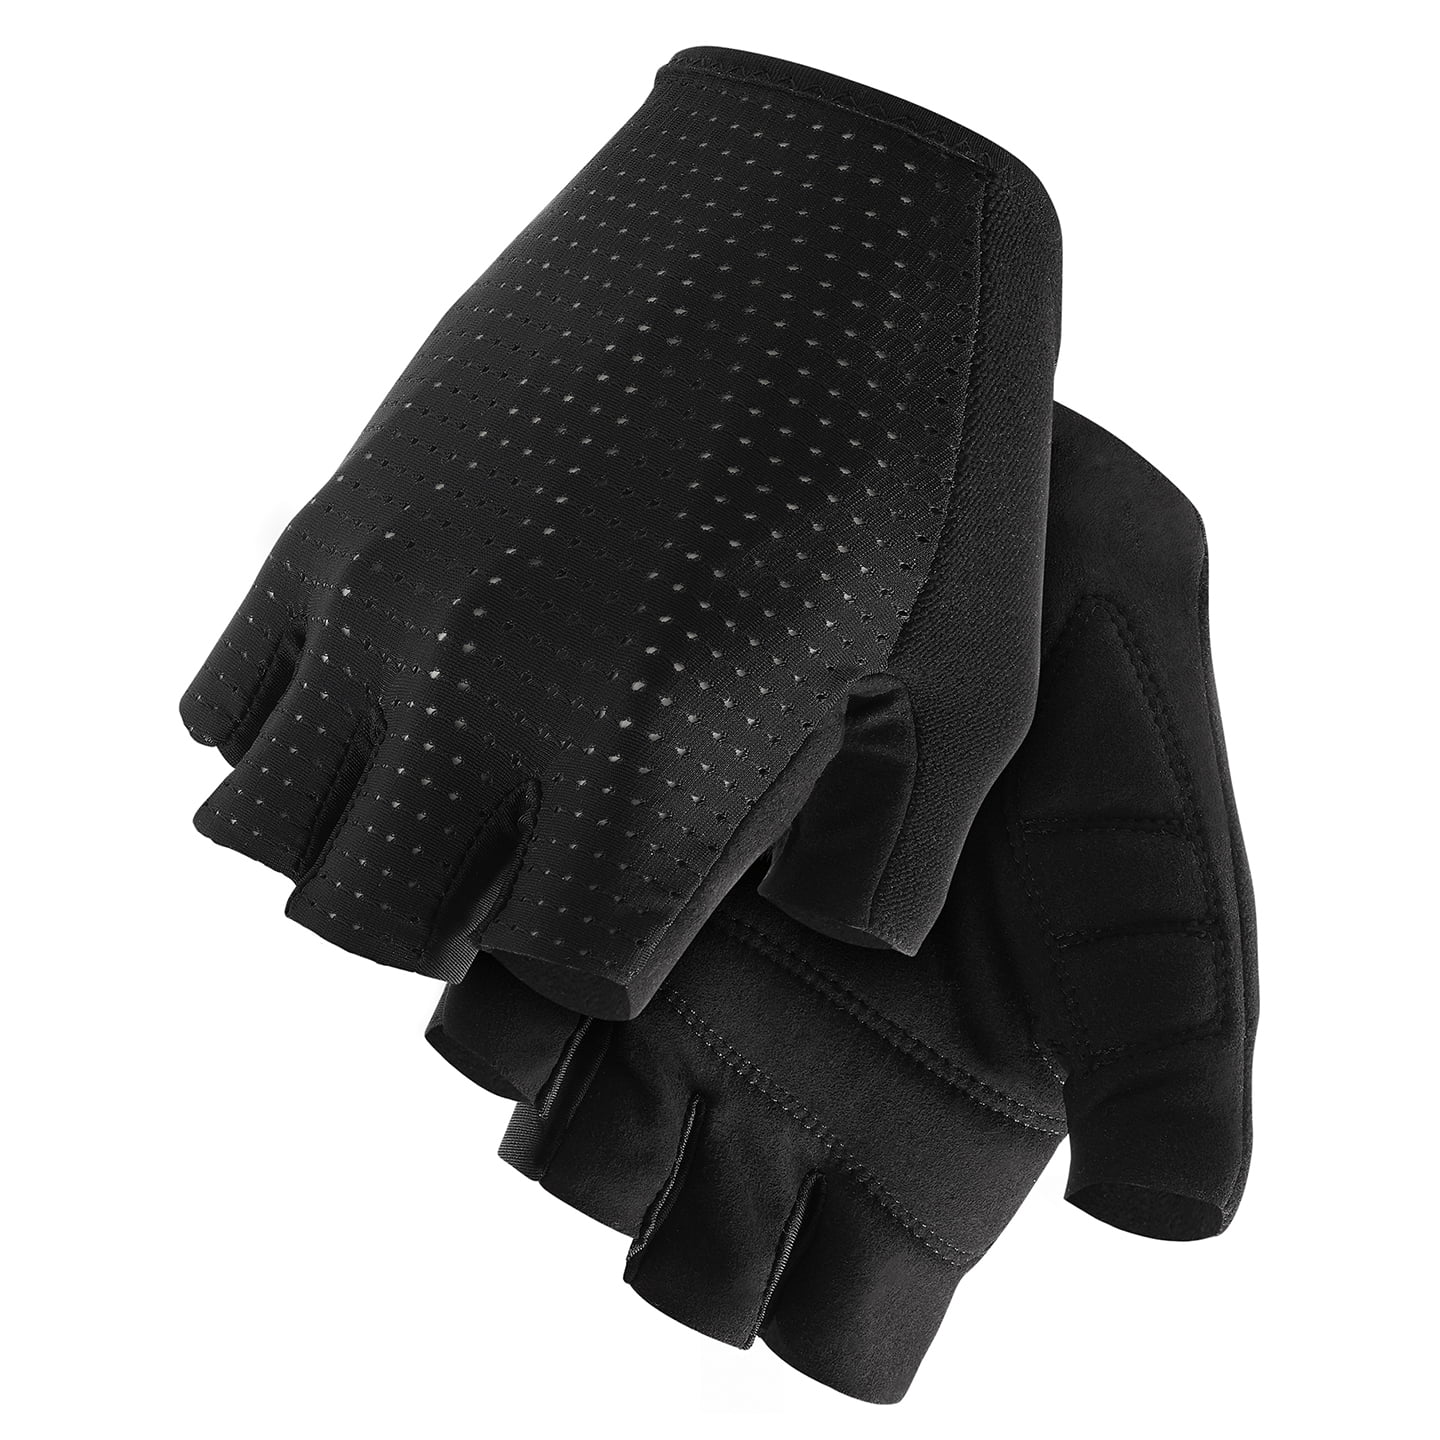 GT C2 Gloves, for men, size 2XL, Cycling gloves, Cycle clothing